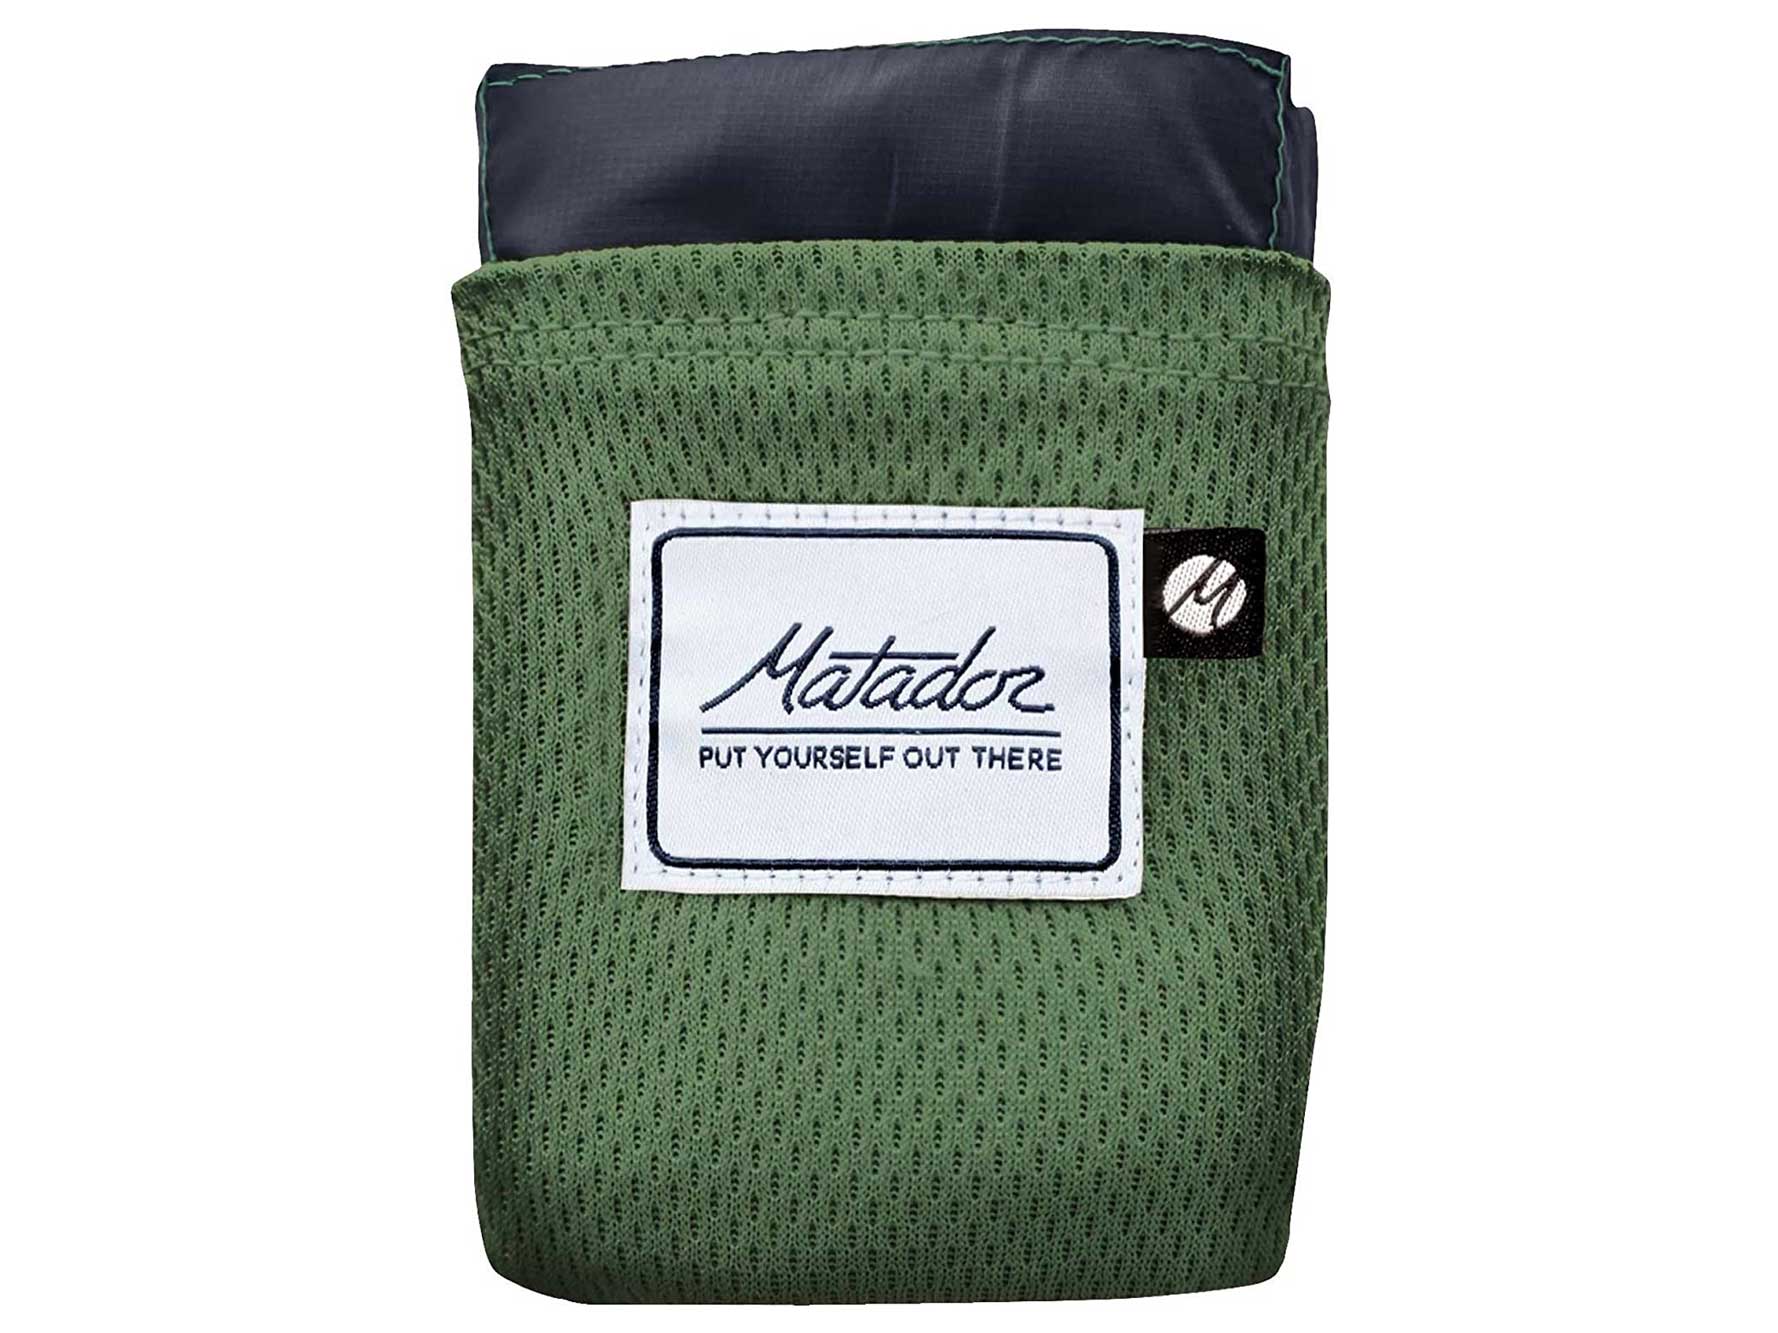 Matador Pocket Blanket 2.0 New Version, Picnic, Beach, Hiking, Camping. Water Resistant with Built-in Ground Stakes